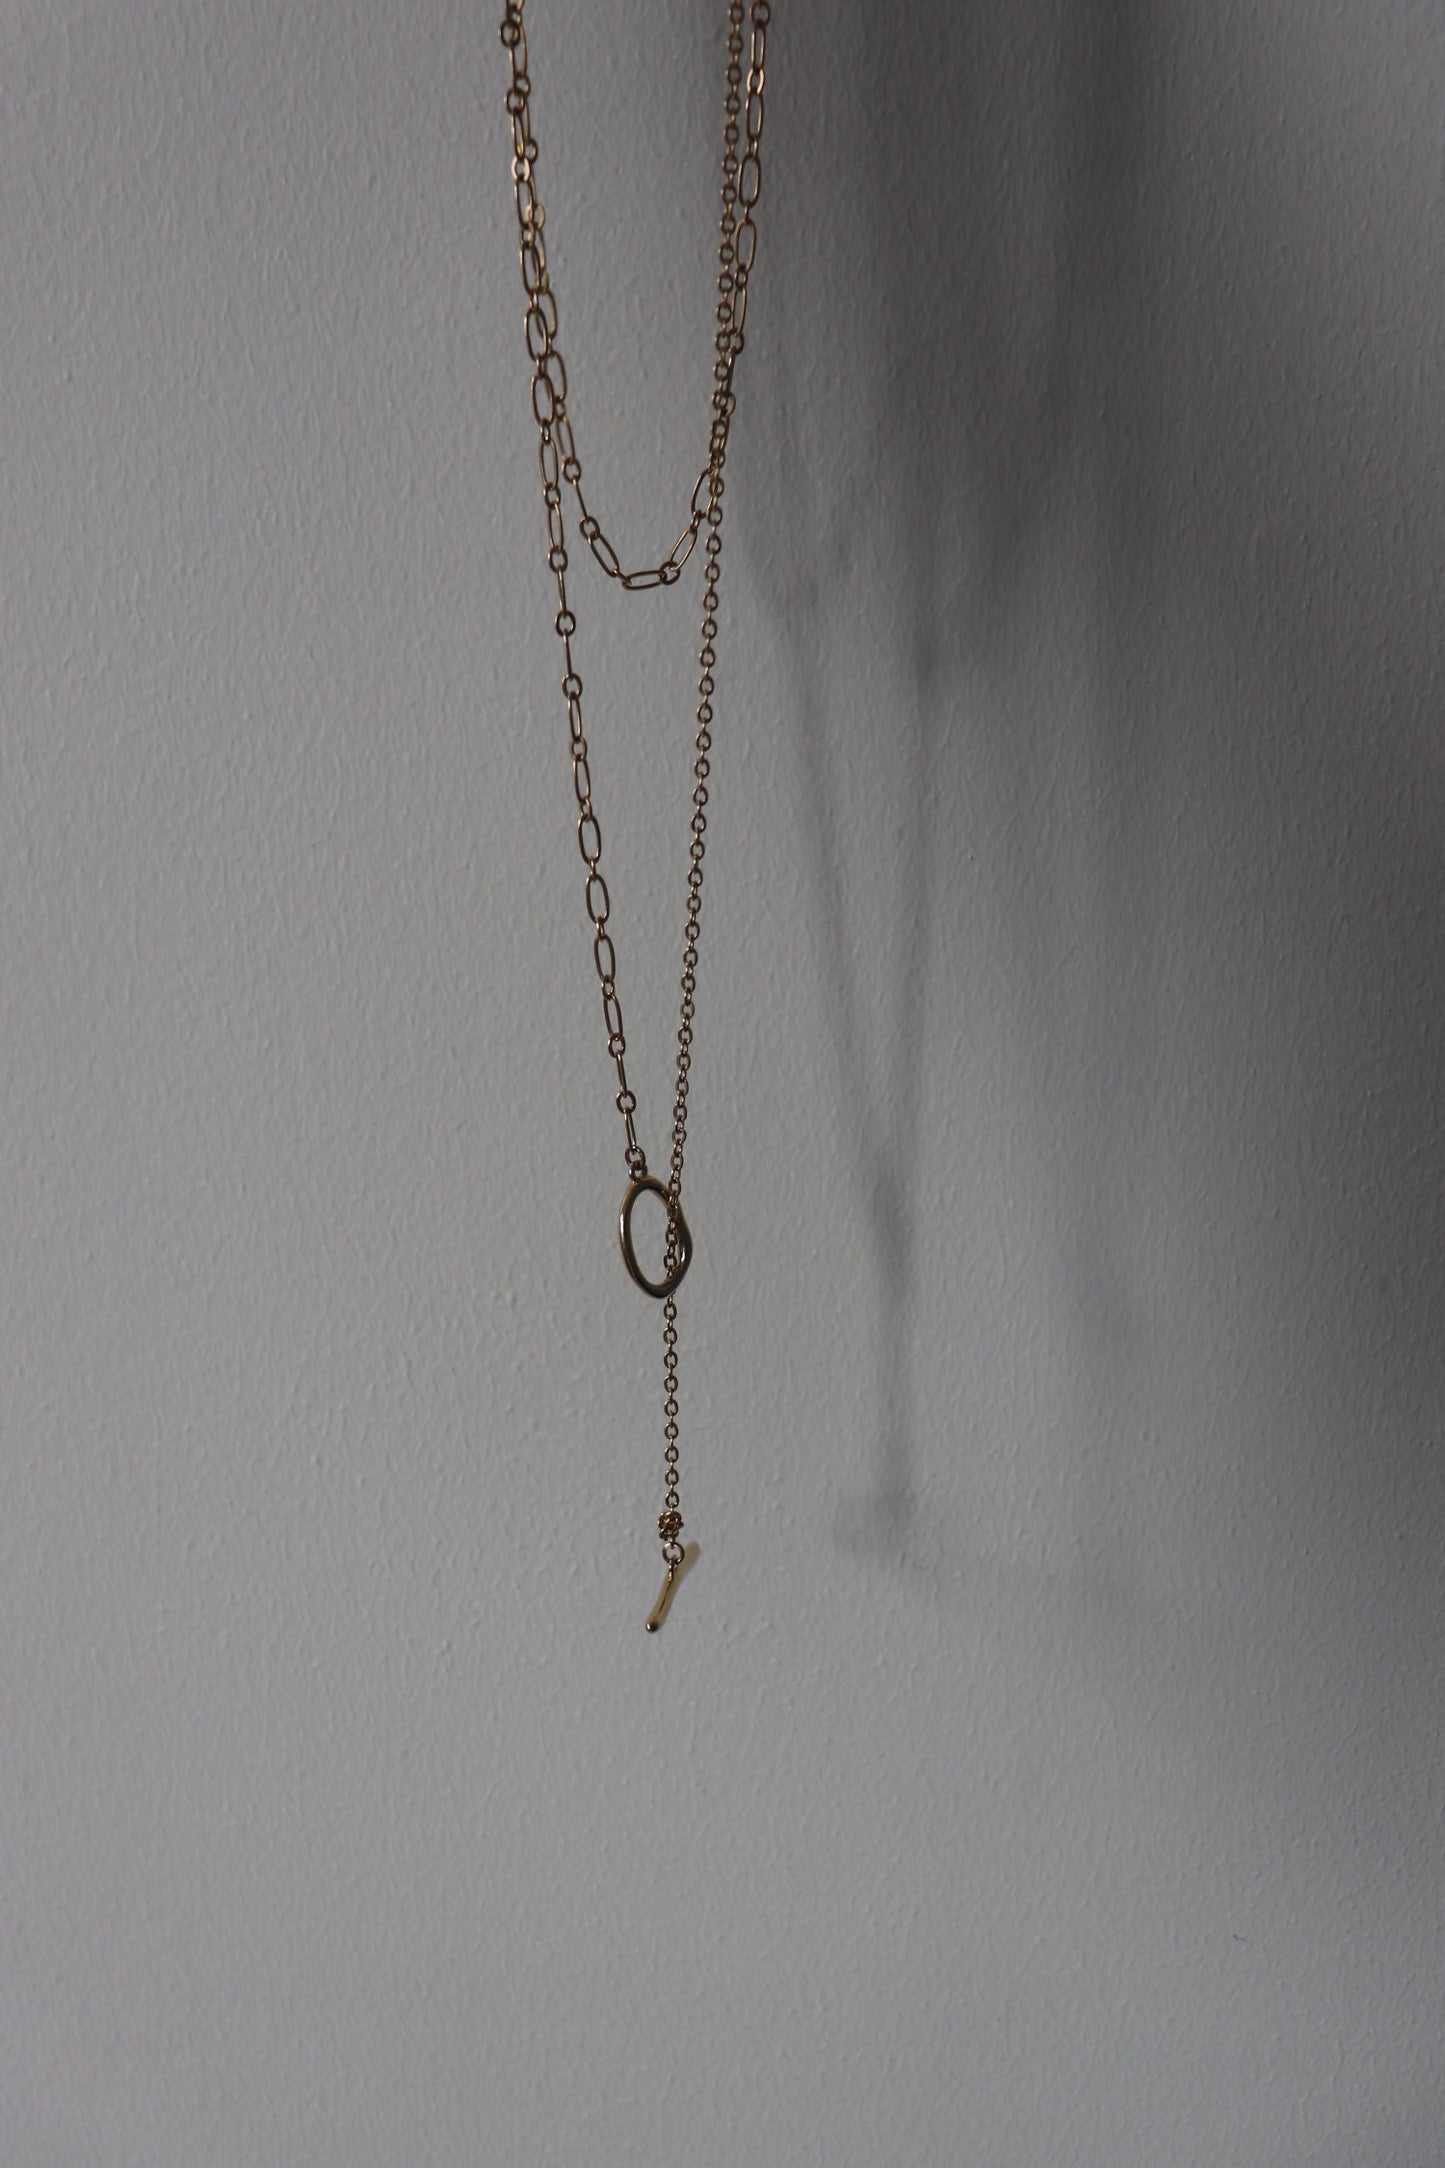 rod hang necklace